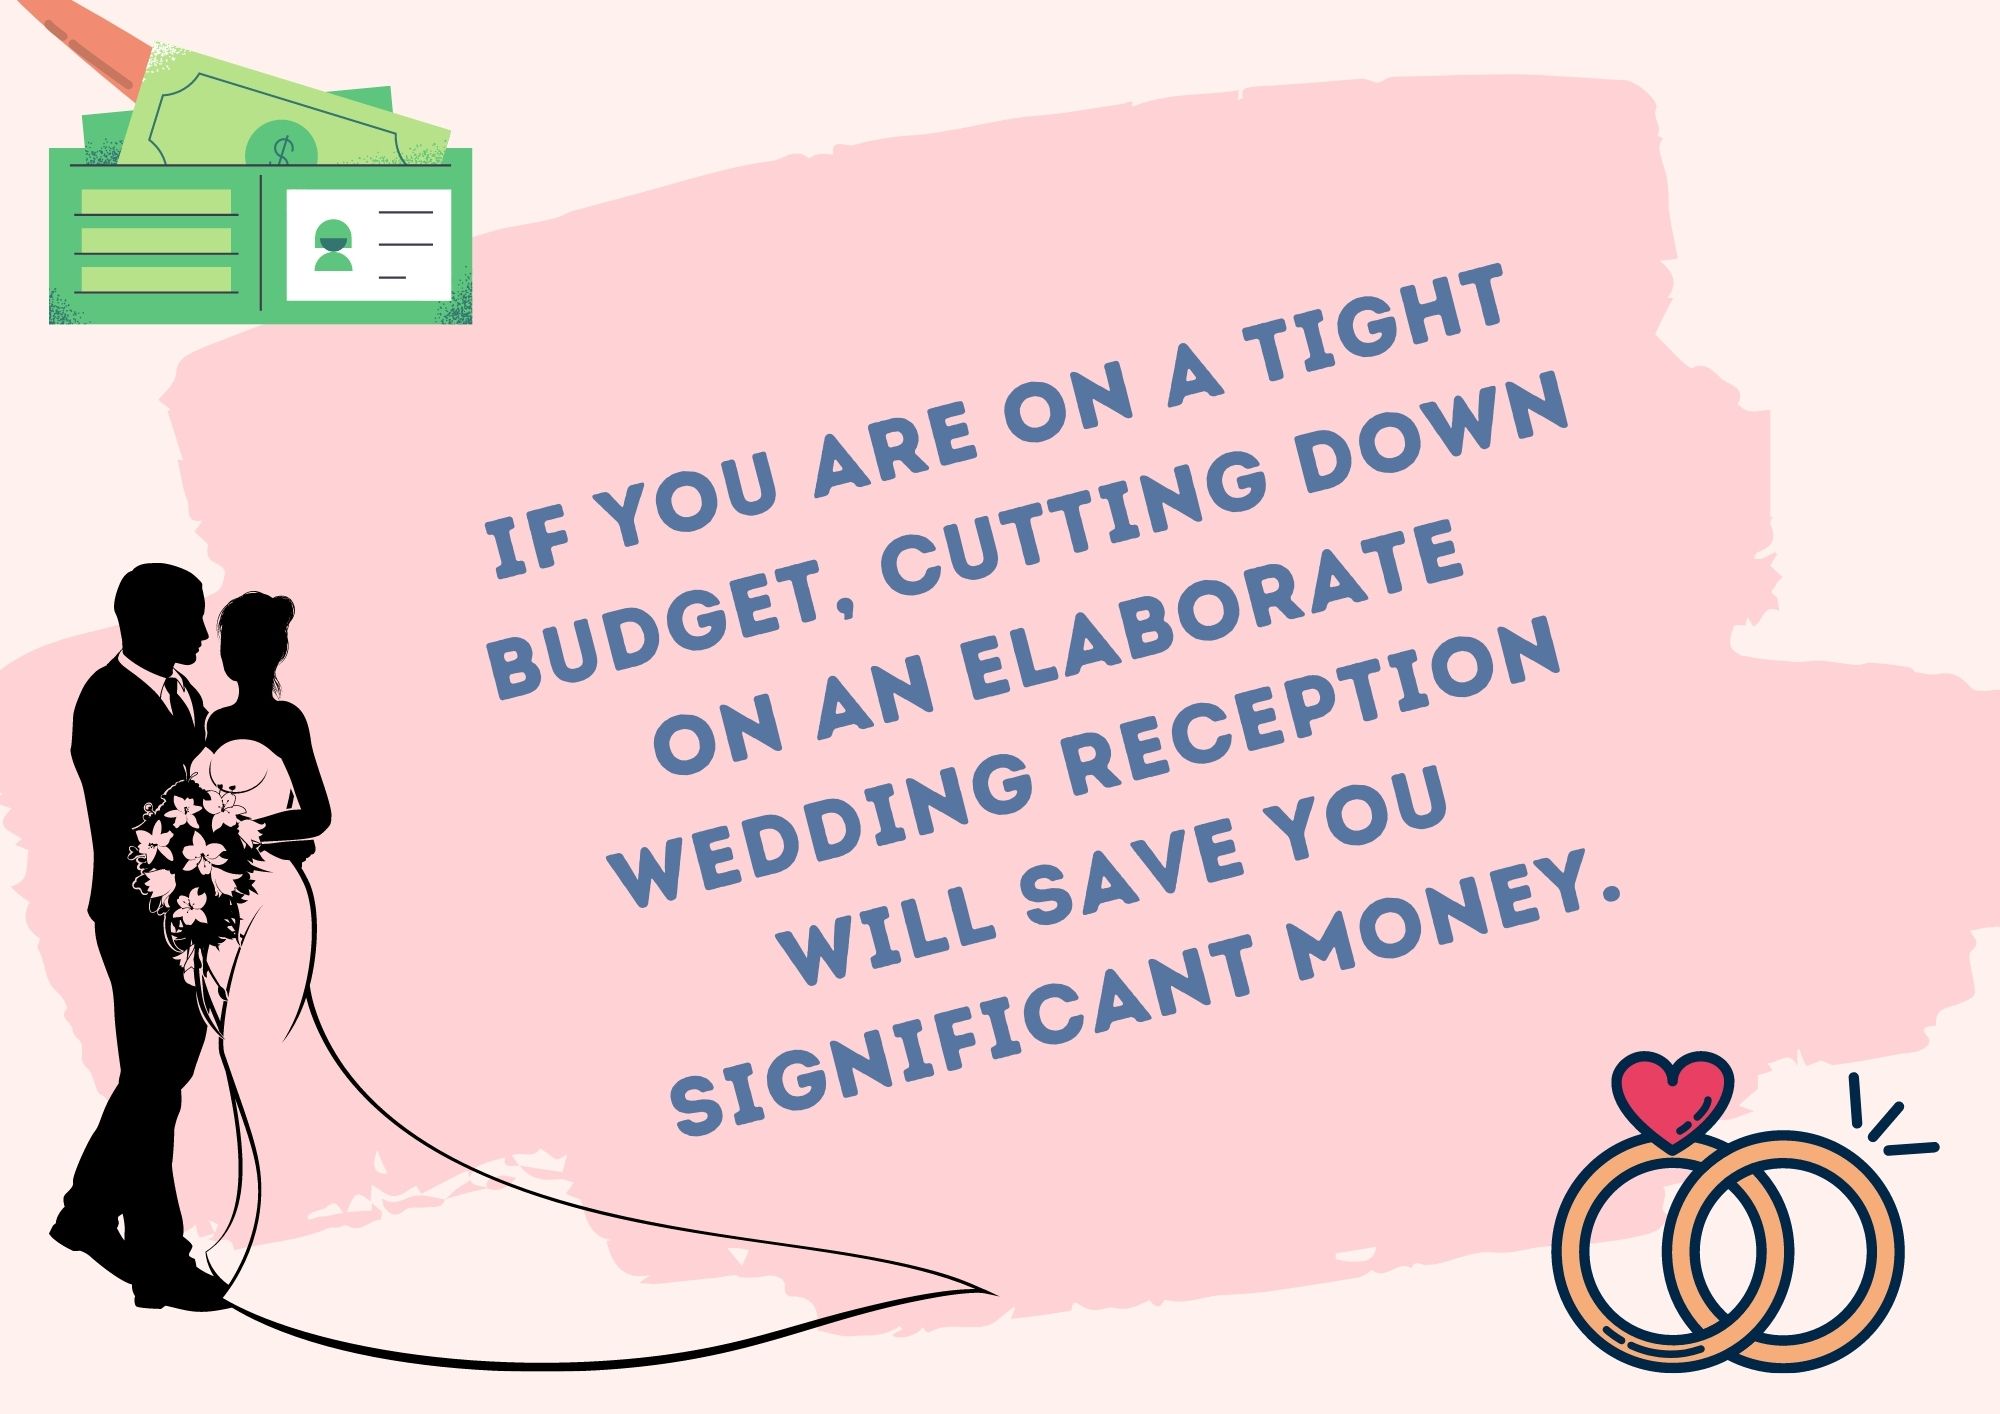 If you are on a tight budget, cutting down on an elaborate wedding reception will save you significant money.